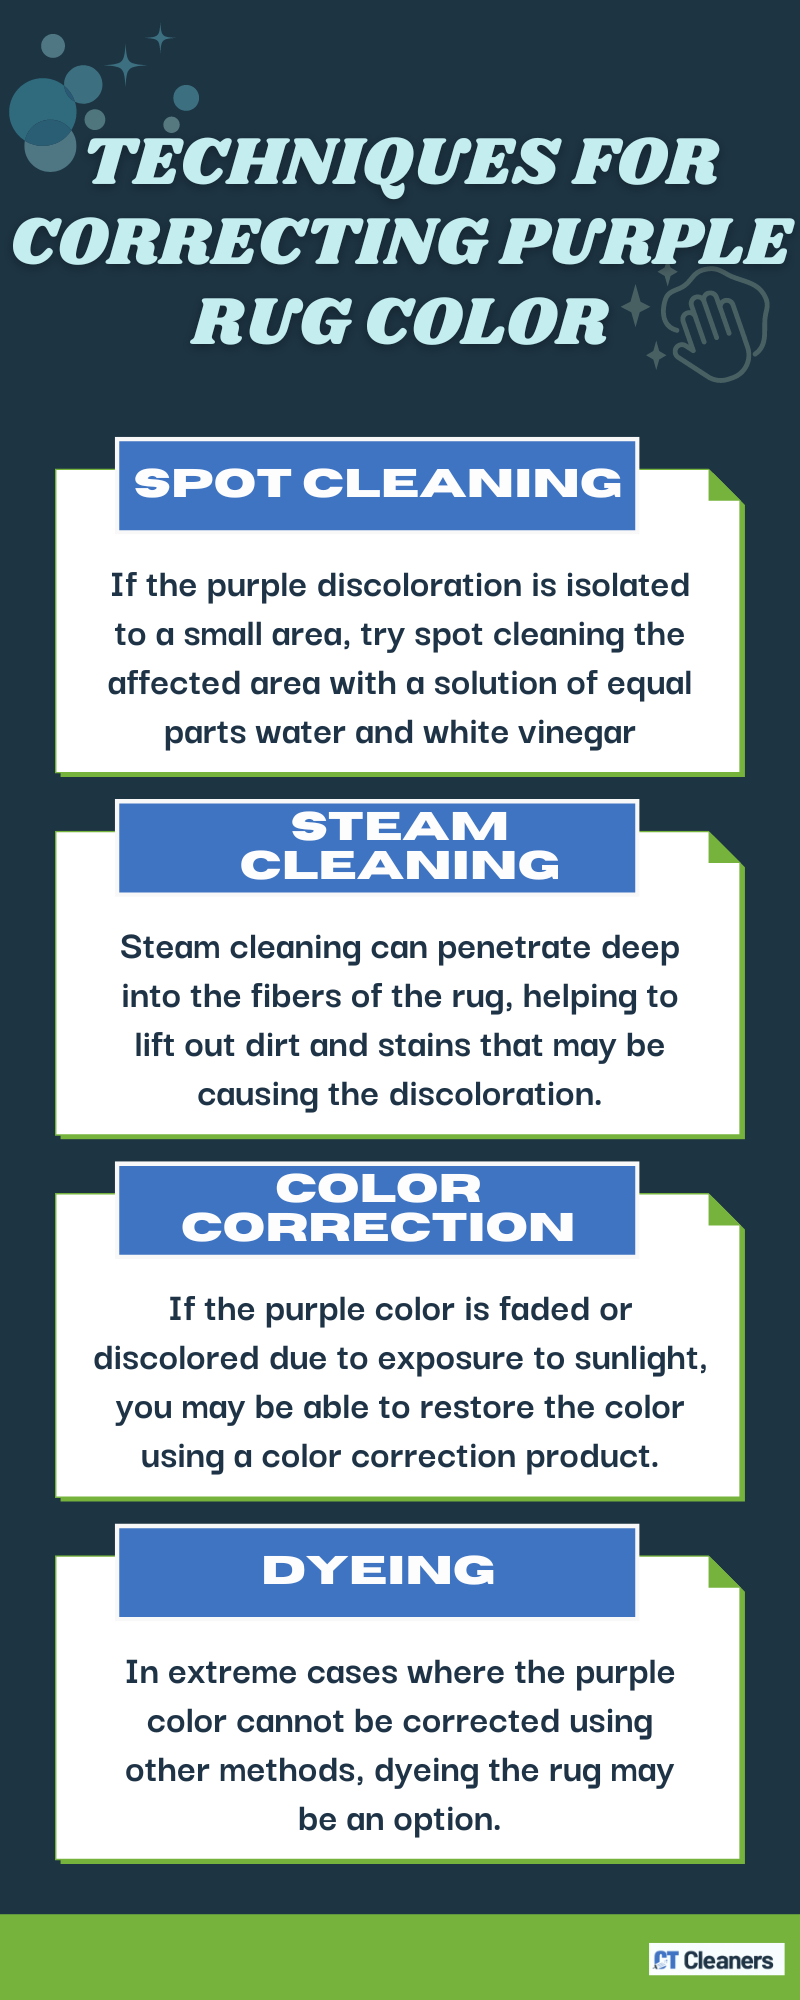 Techniques for Correcting Purple Rug Color